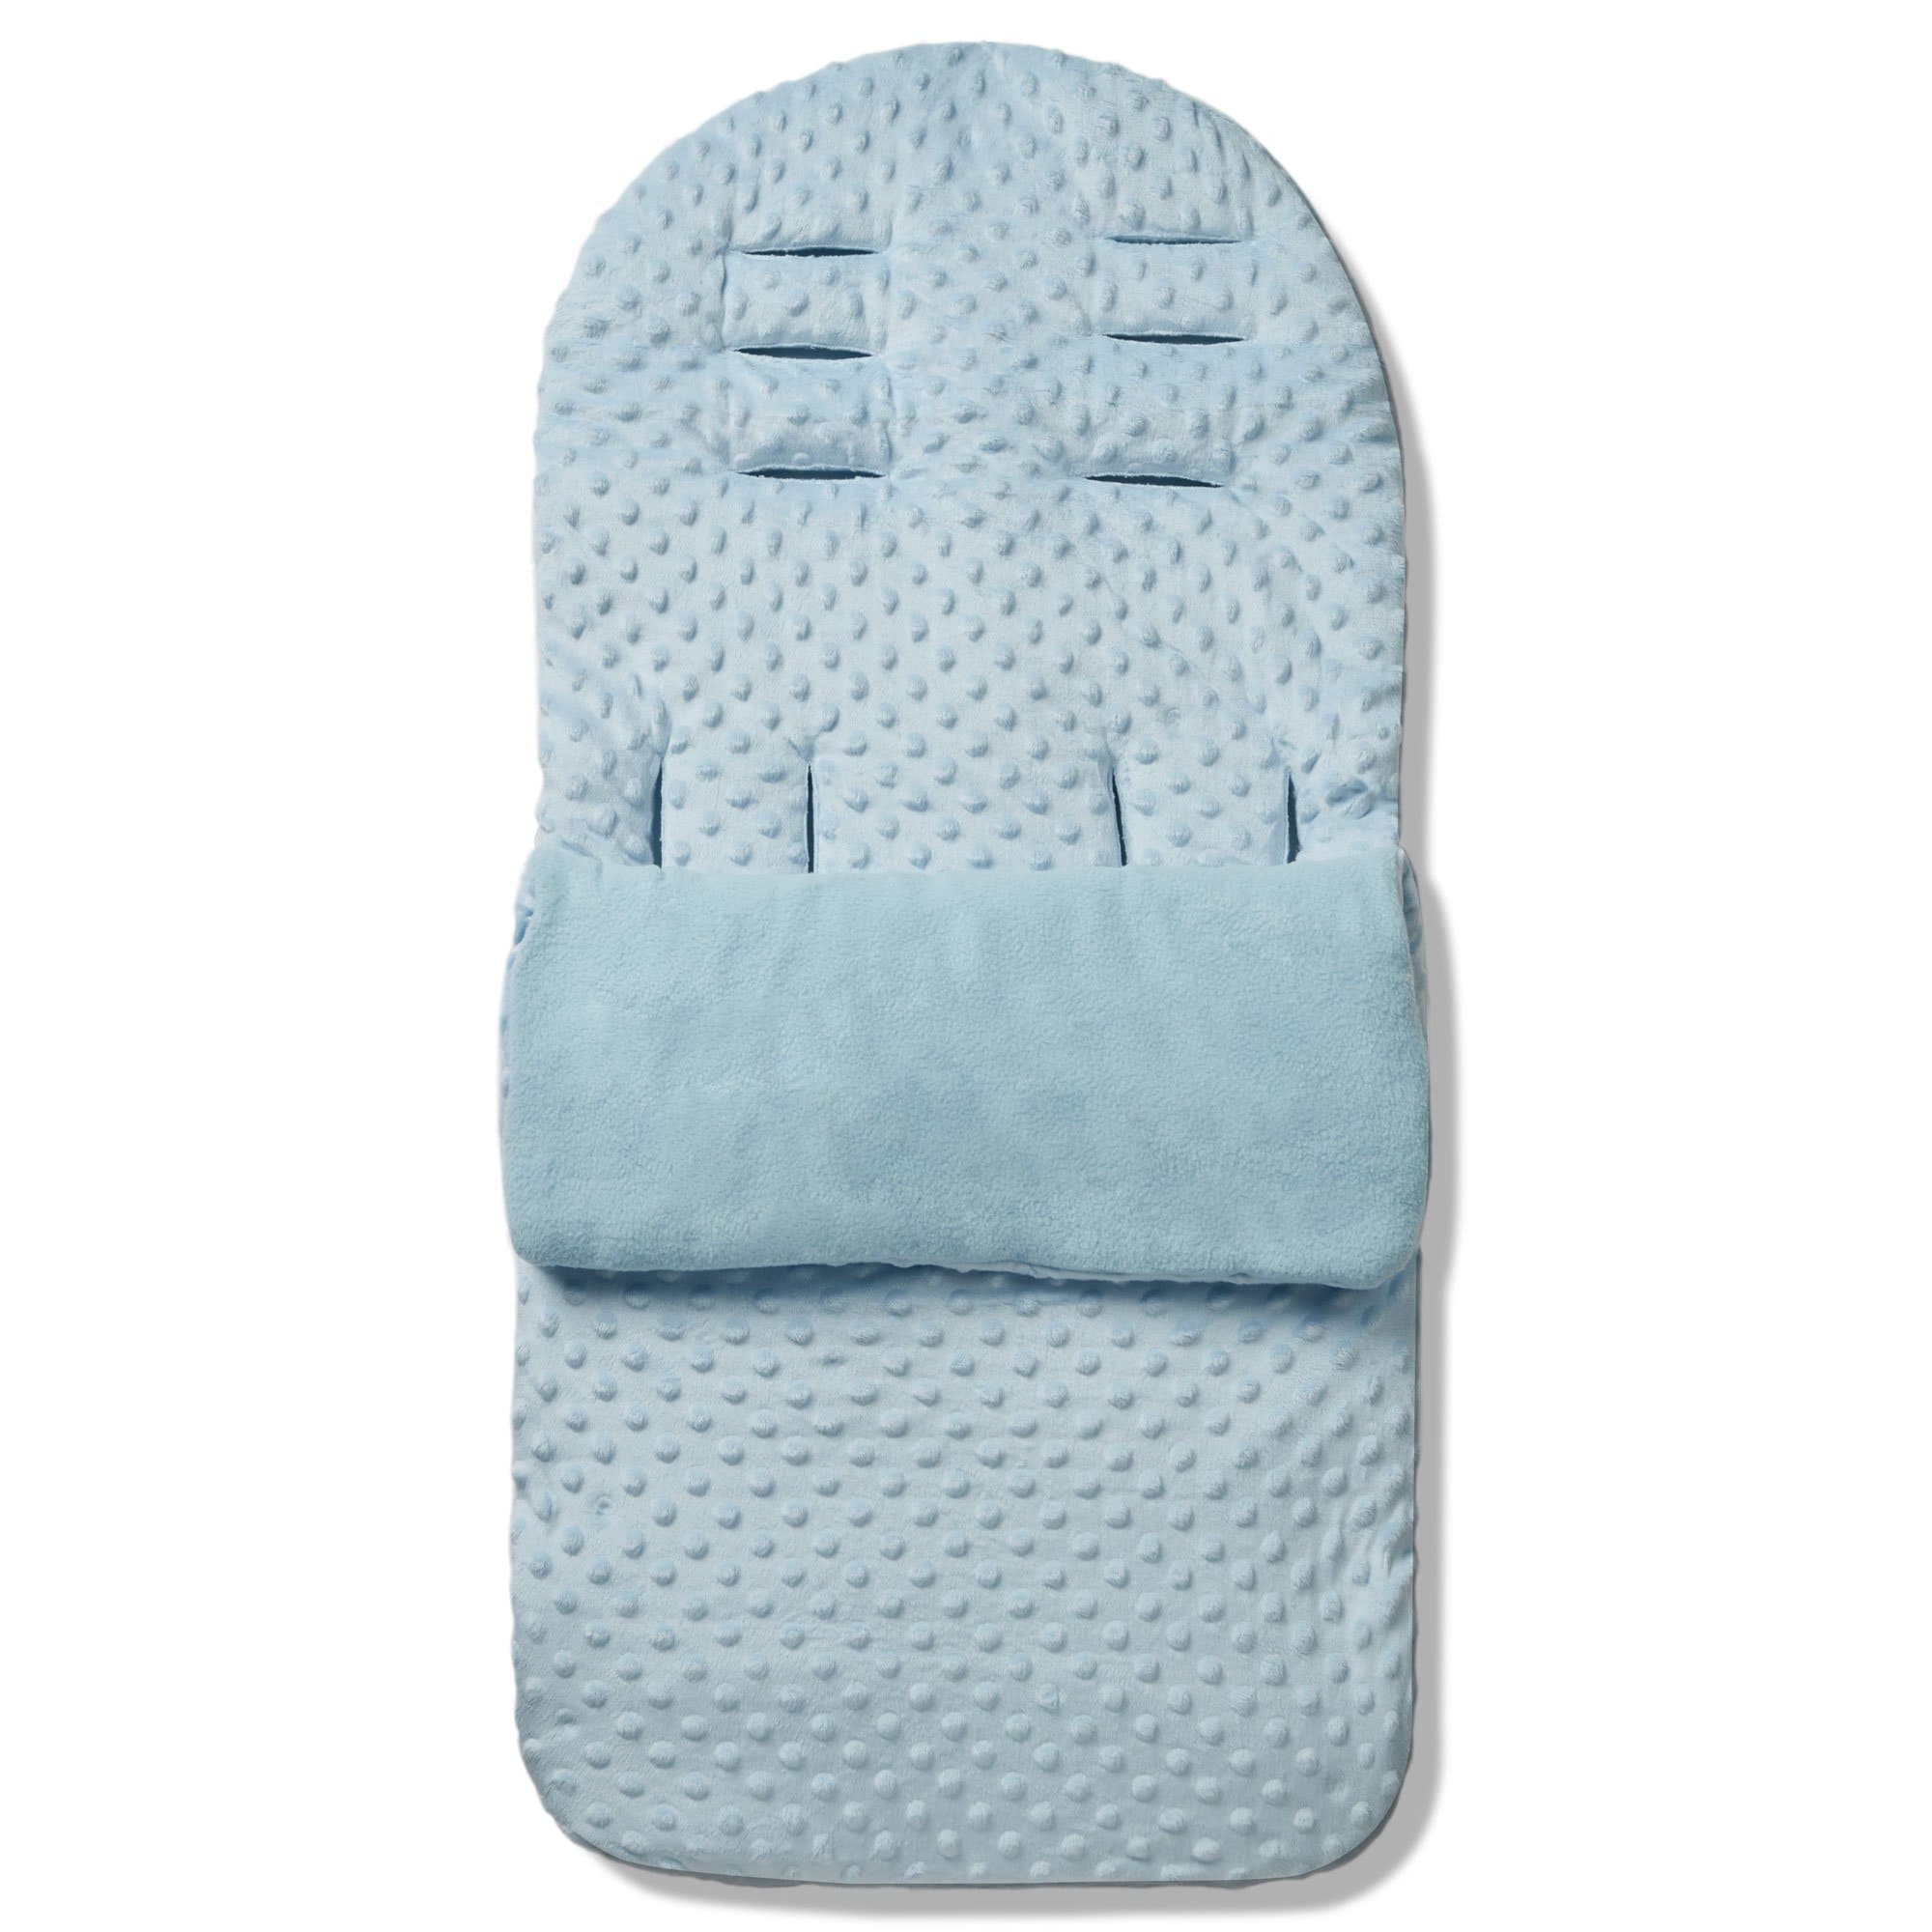 Dimple Footmuff / Cosy Toes Compatible with XTS - For Your Little One